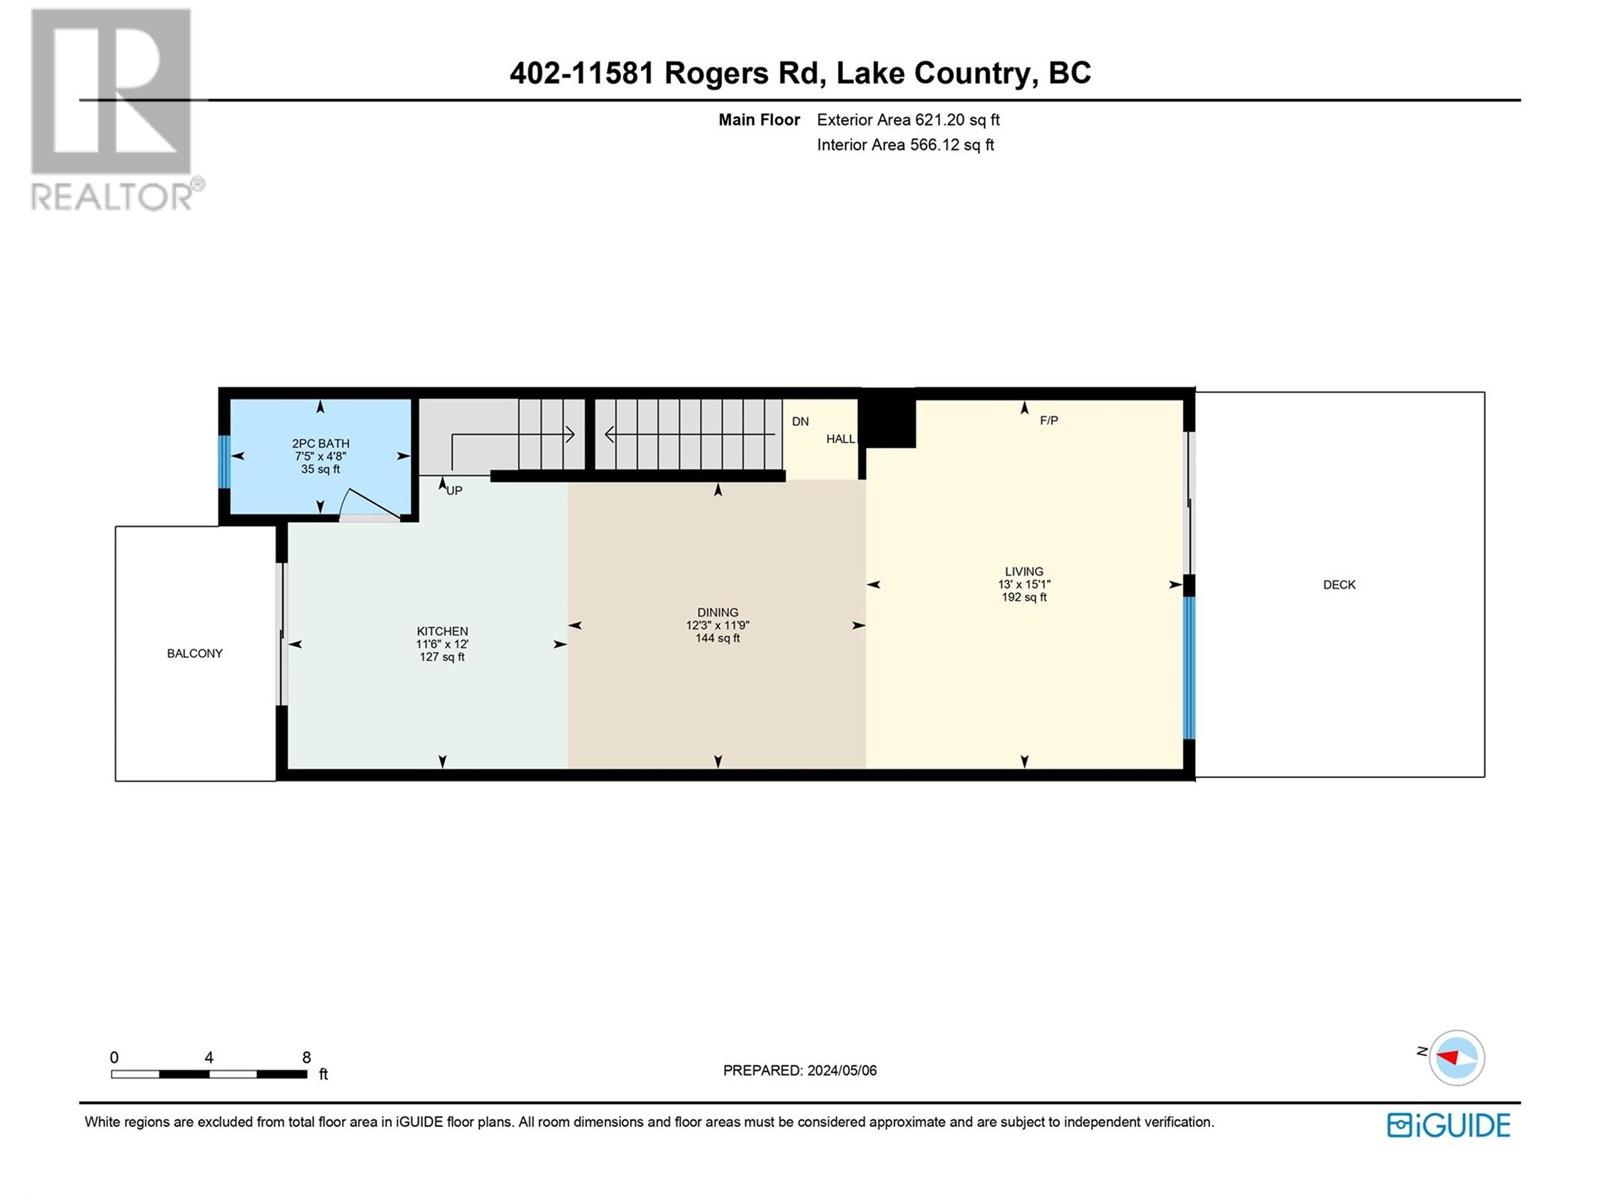 402 11581 Rogers Road, Lake Country